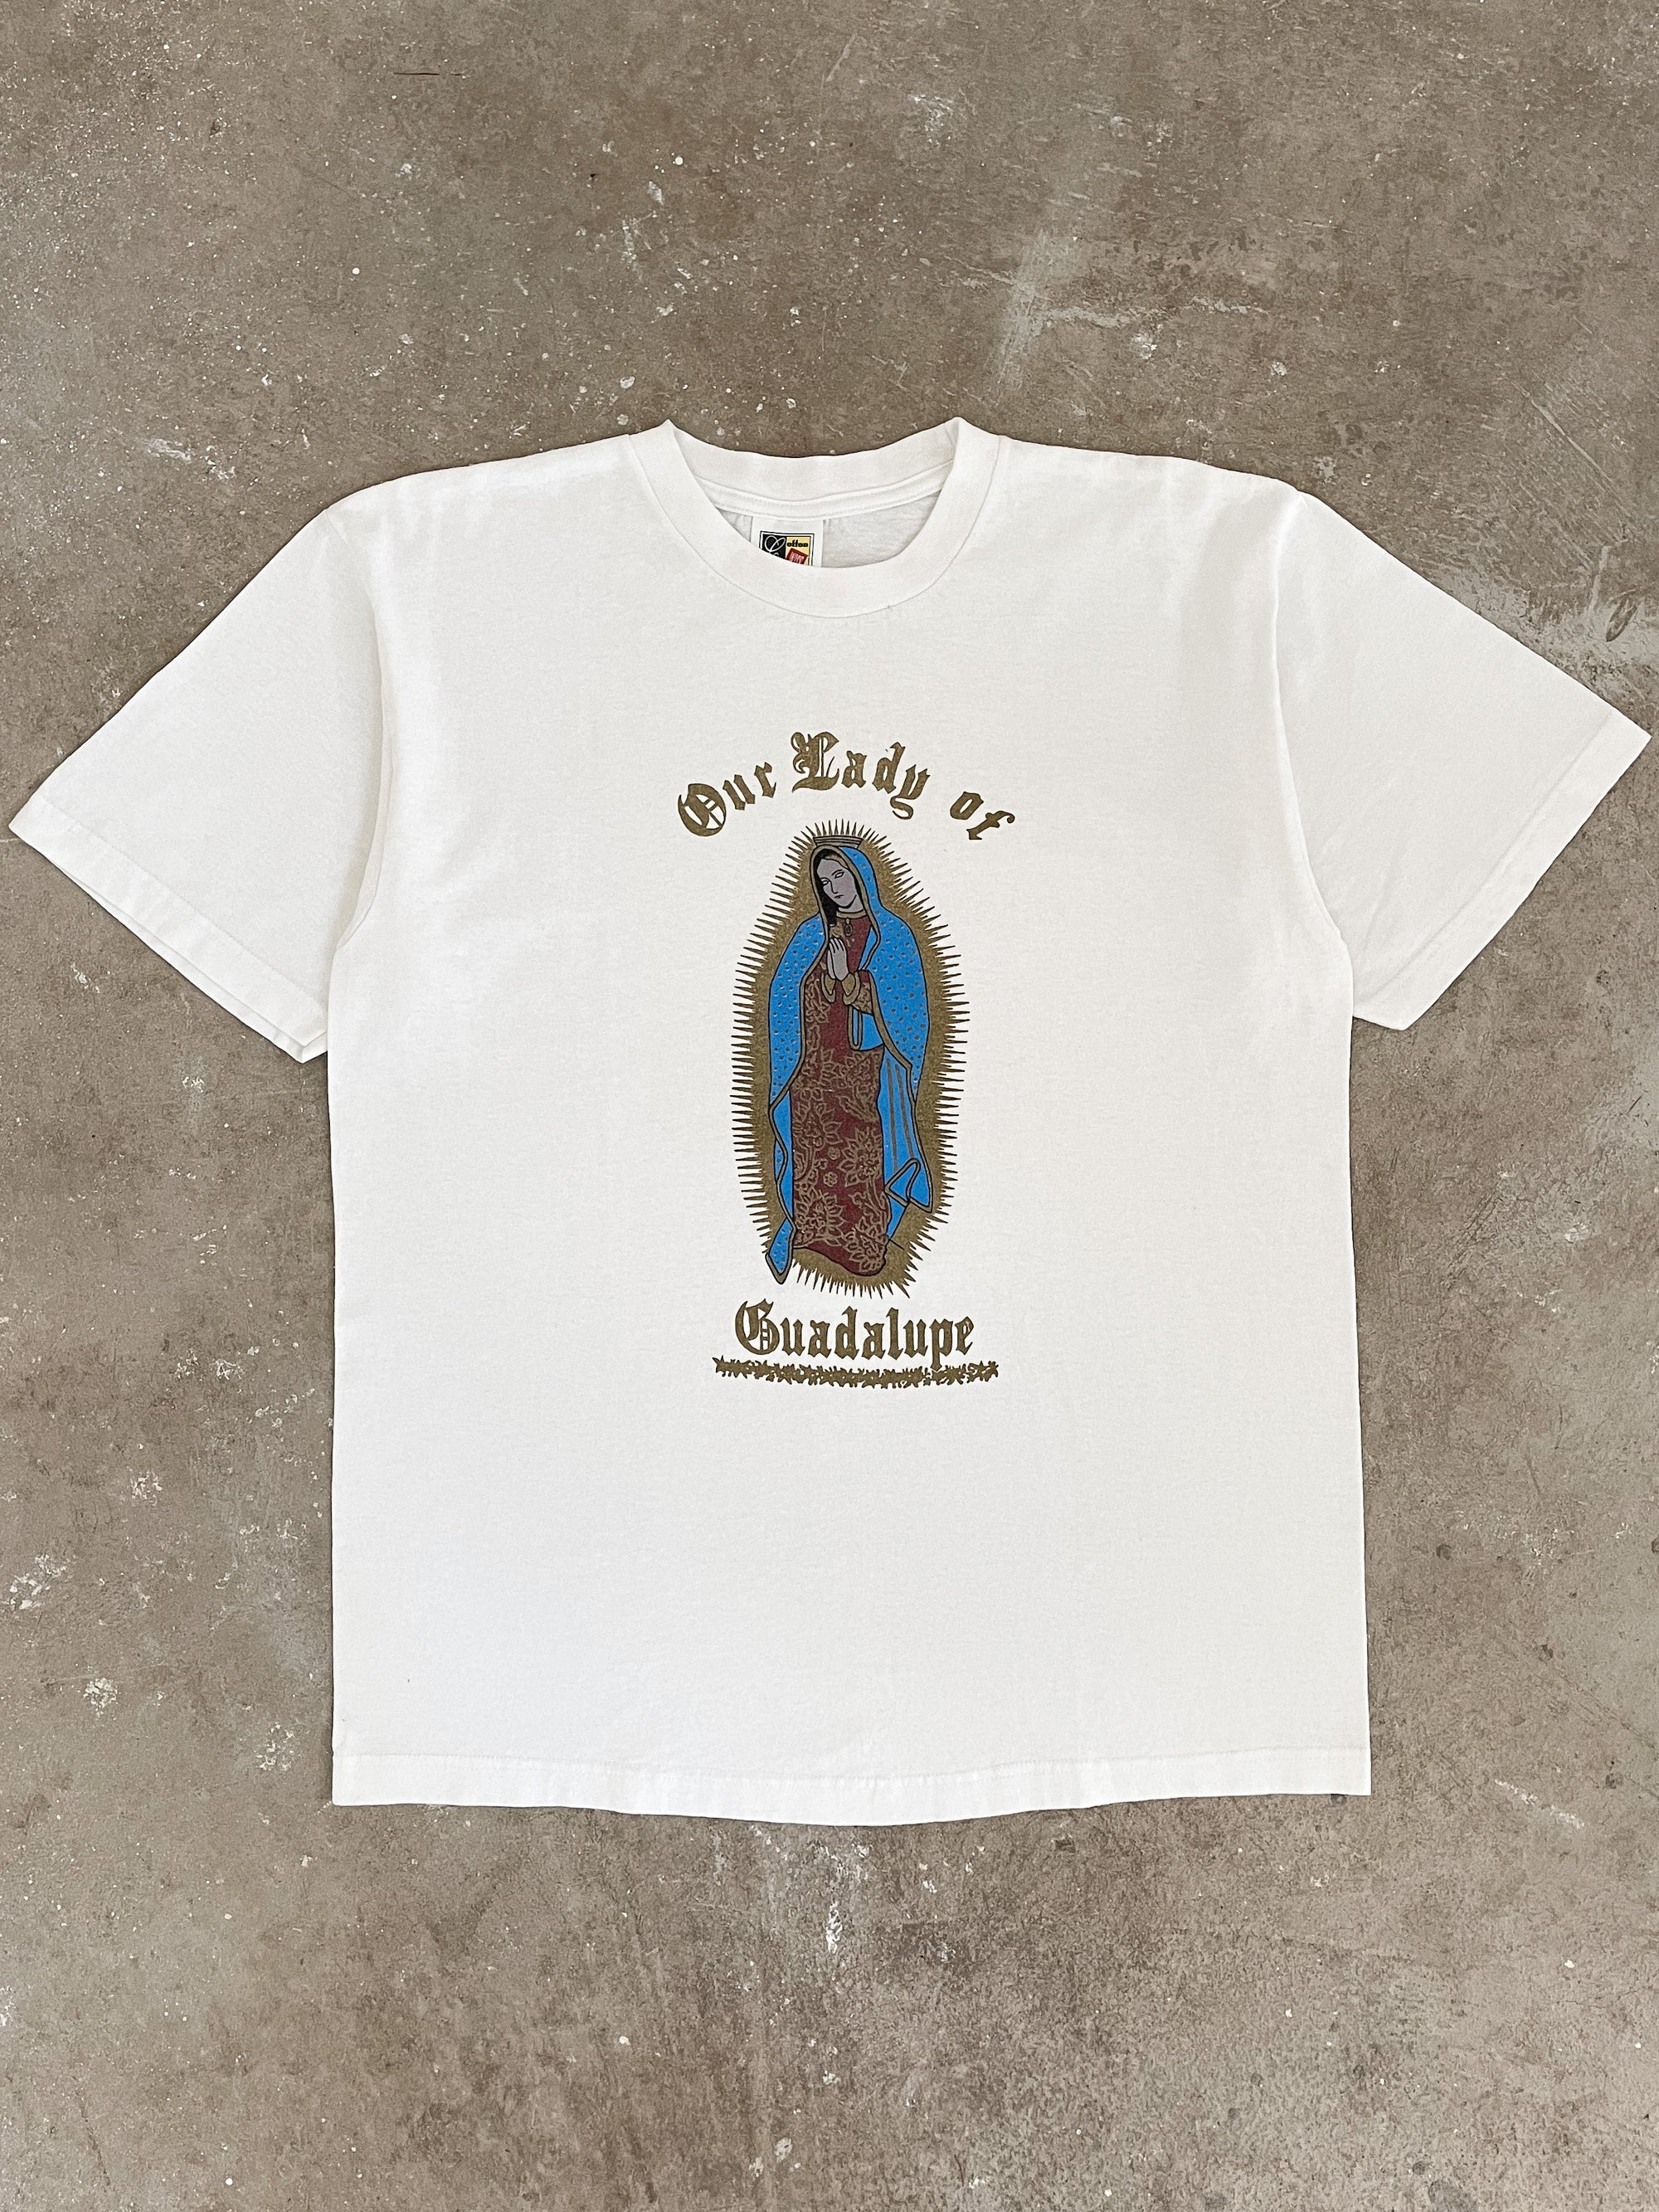 1990s/00s “Our Lady of Guadalupe” Tee (M/L)